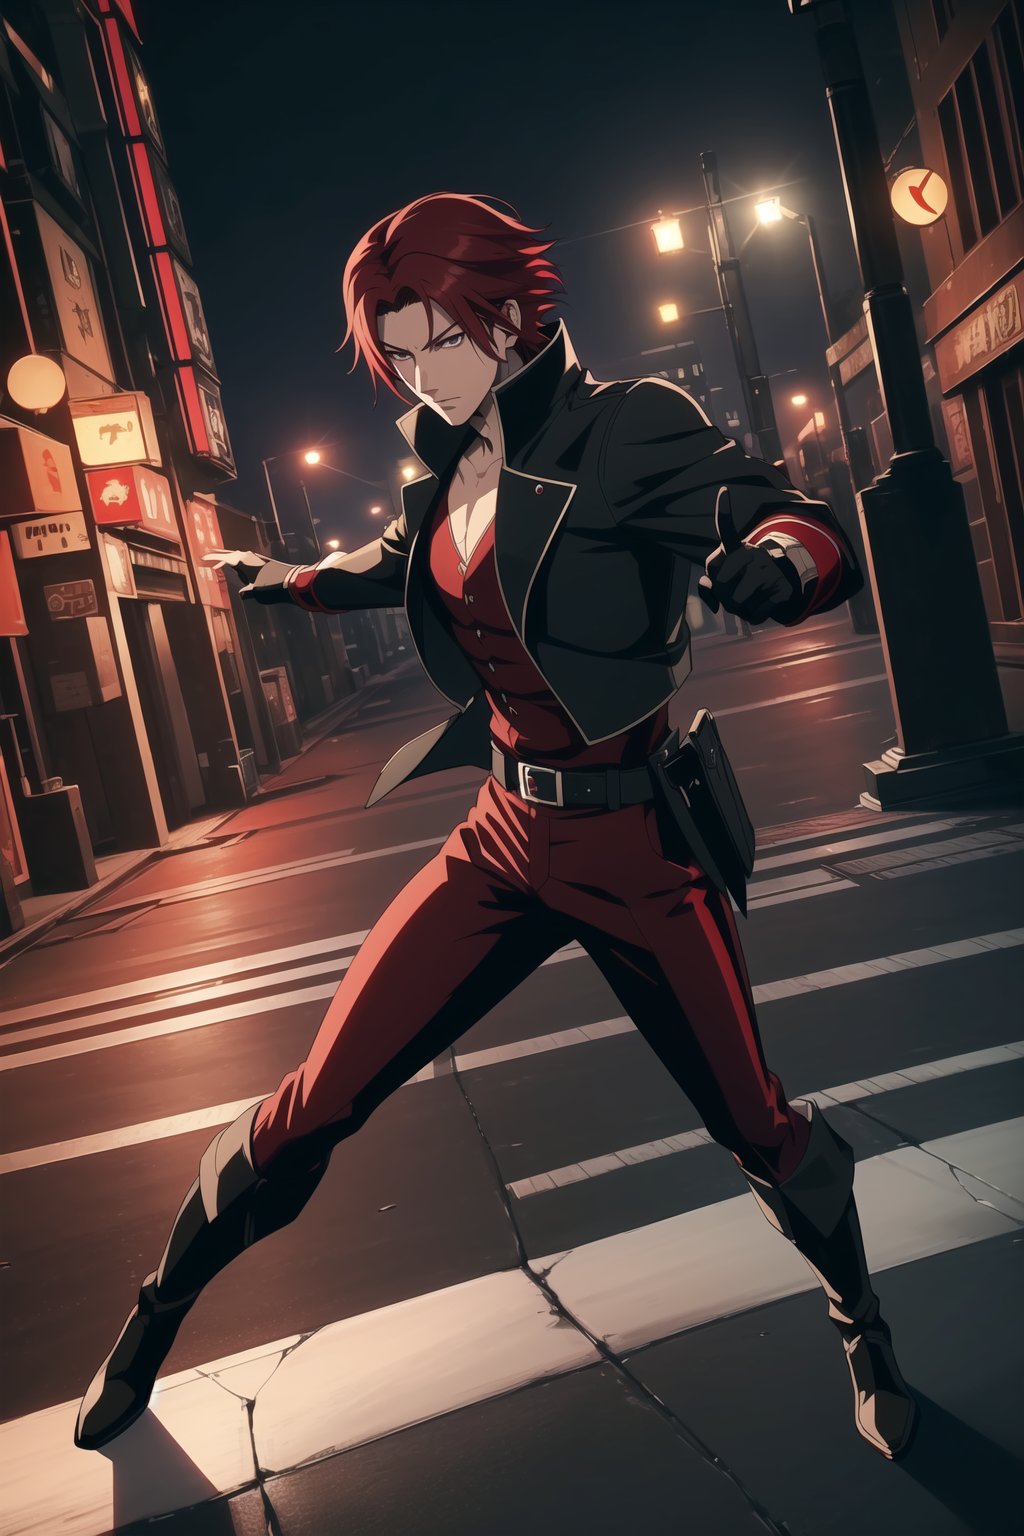 (Masterpiece, Best Quality), (A Skillful 25-Year-Old Japanese Male Secret Agent), (Wavy Short Crimson Hair:1.4), (Pale Skin), (Dark Brown Eyes), (Wearing Black and Red Sleek Tactical Outfit:1.4), (Modern City Road at Night:1.4), (Dynamic Pose:1.2), Centered, (Half Body Shot:1.4), (From Front Shot:1.4), Insane Details, Intricate Face Detail, Intricate Hand Details, Cinematic Shot and Lighting, Realistic and Vibrant Colors, Sharp Focus, Ultra Detailed, Realistic Images, Depth of Field, Incredibly Realistic Environment and Scene, Master Composition and Cinematography, castlevania style,castlevania style